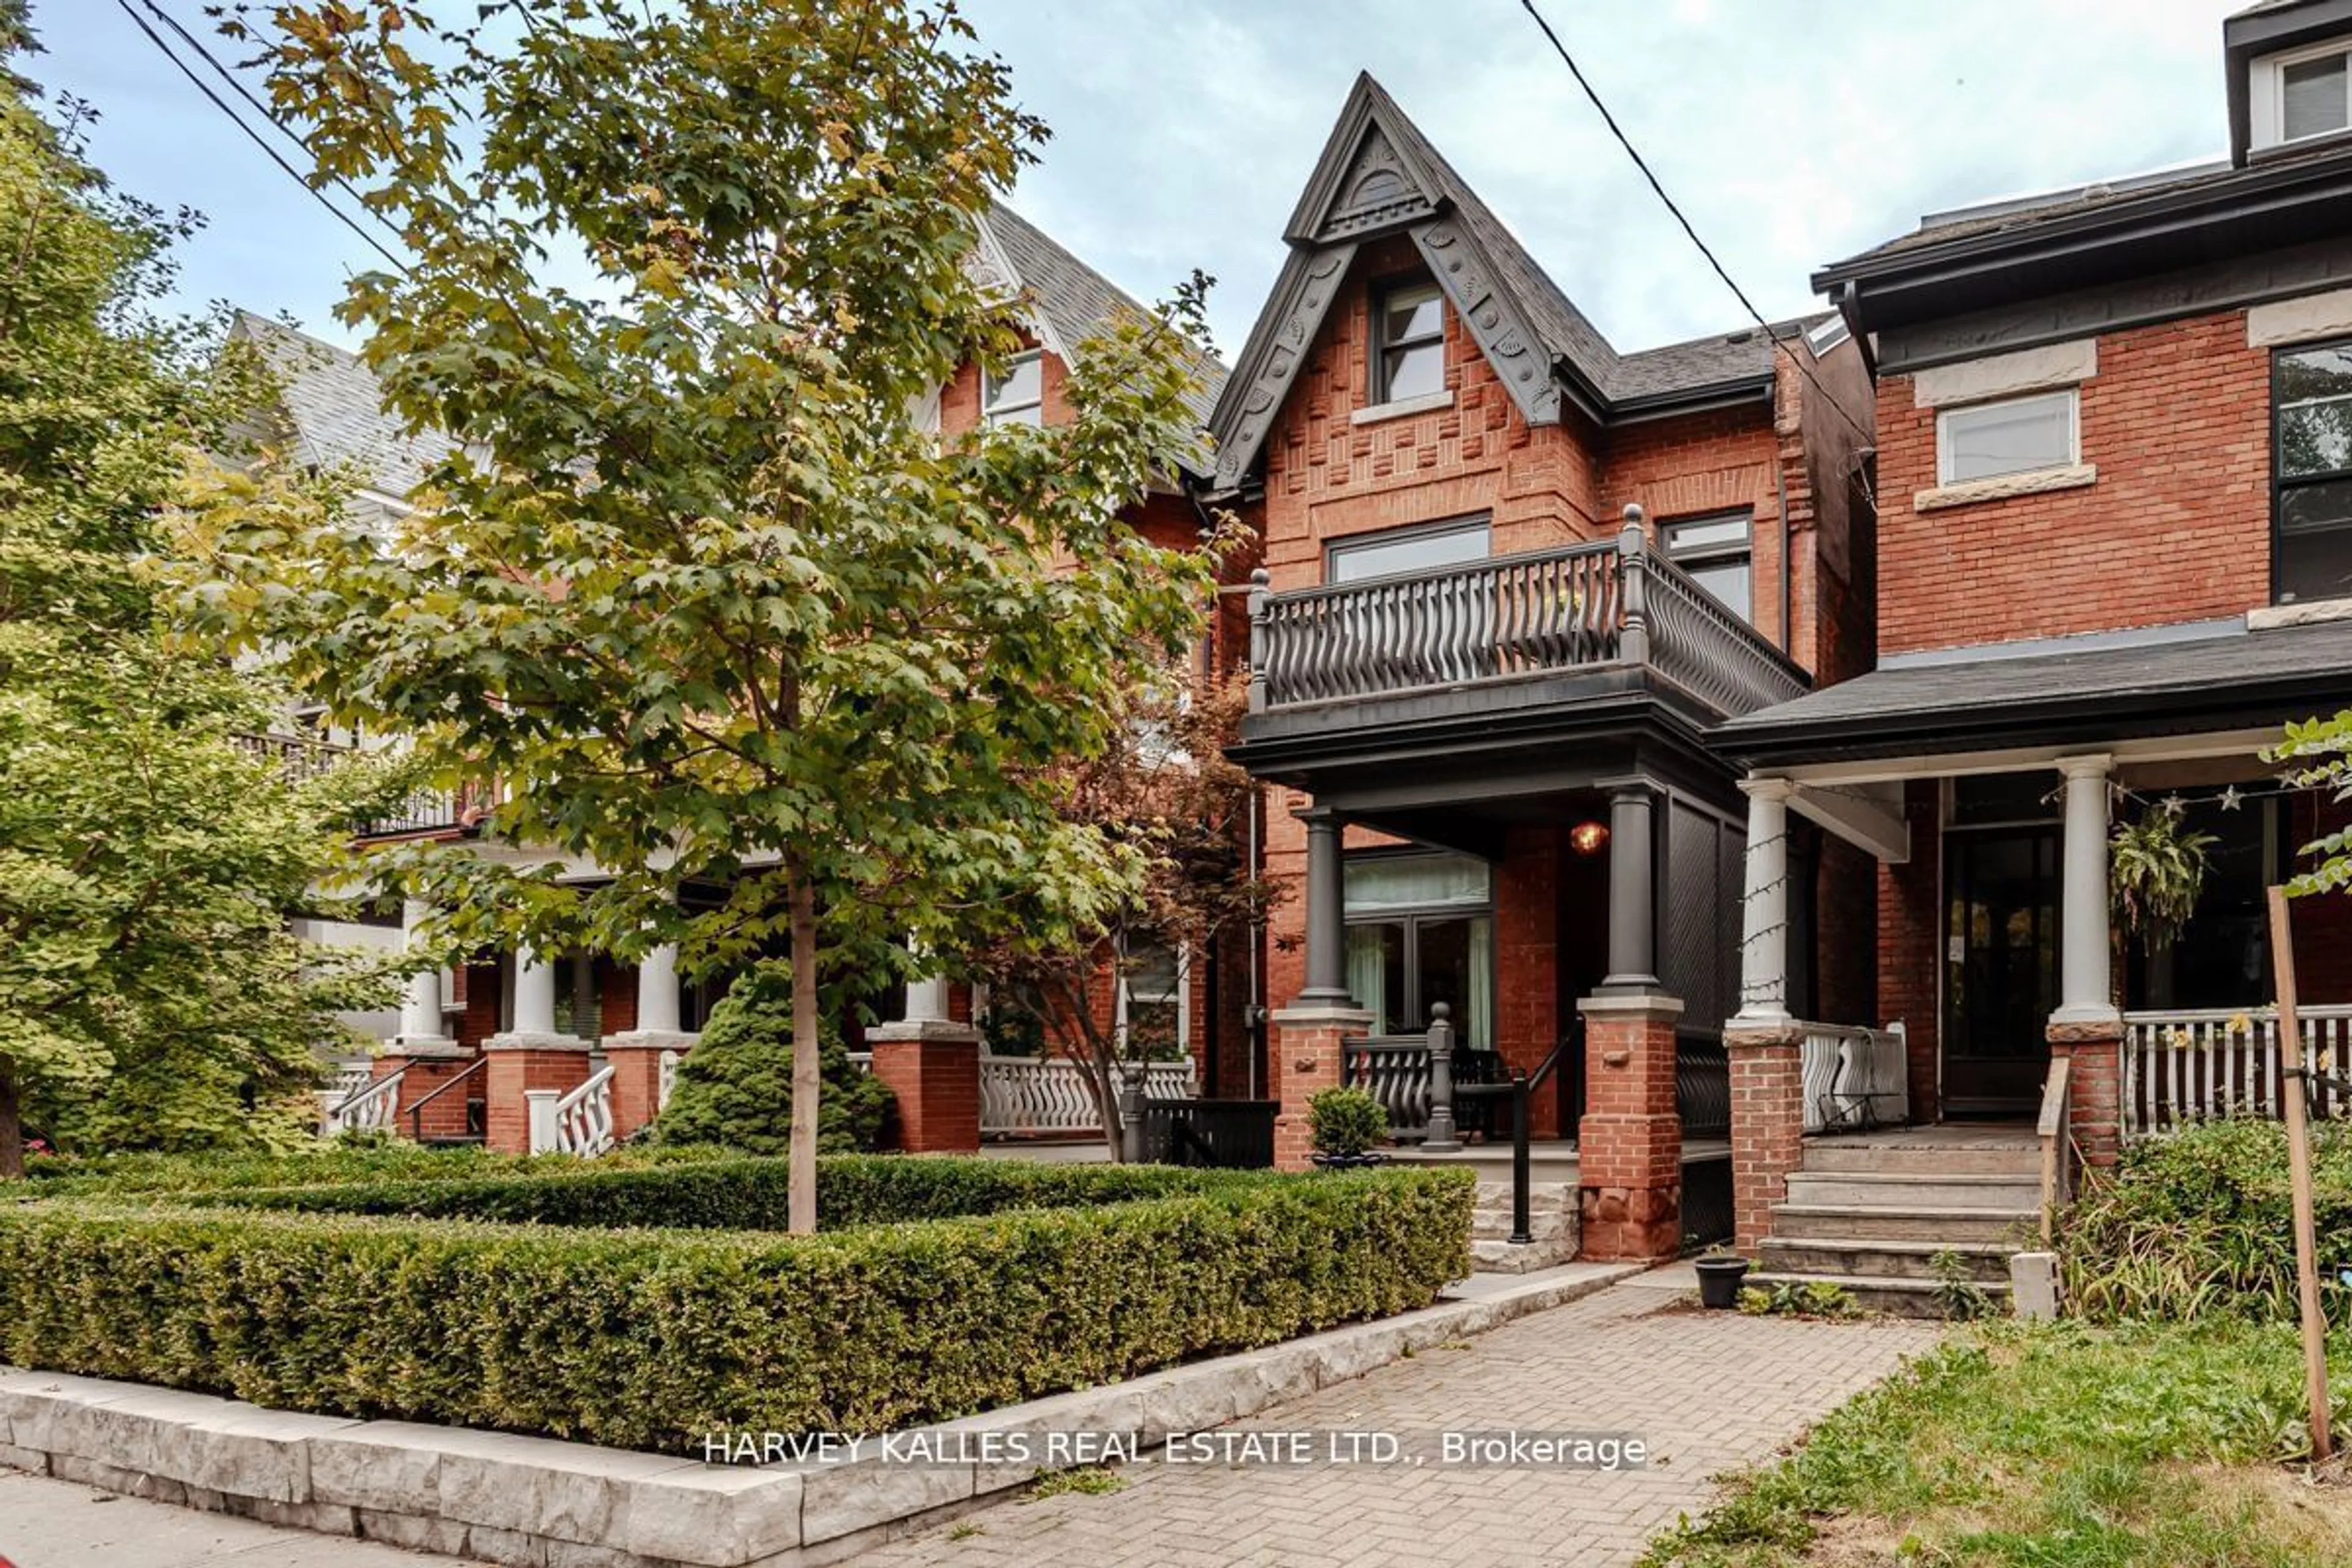 Home with brick exterior material for 473 Euclid Ave, Toronto Ontario M6G 2T1